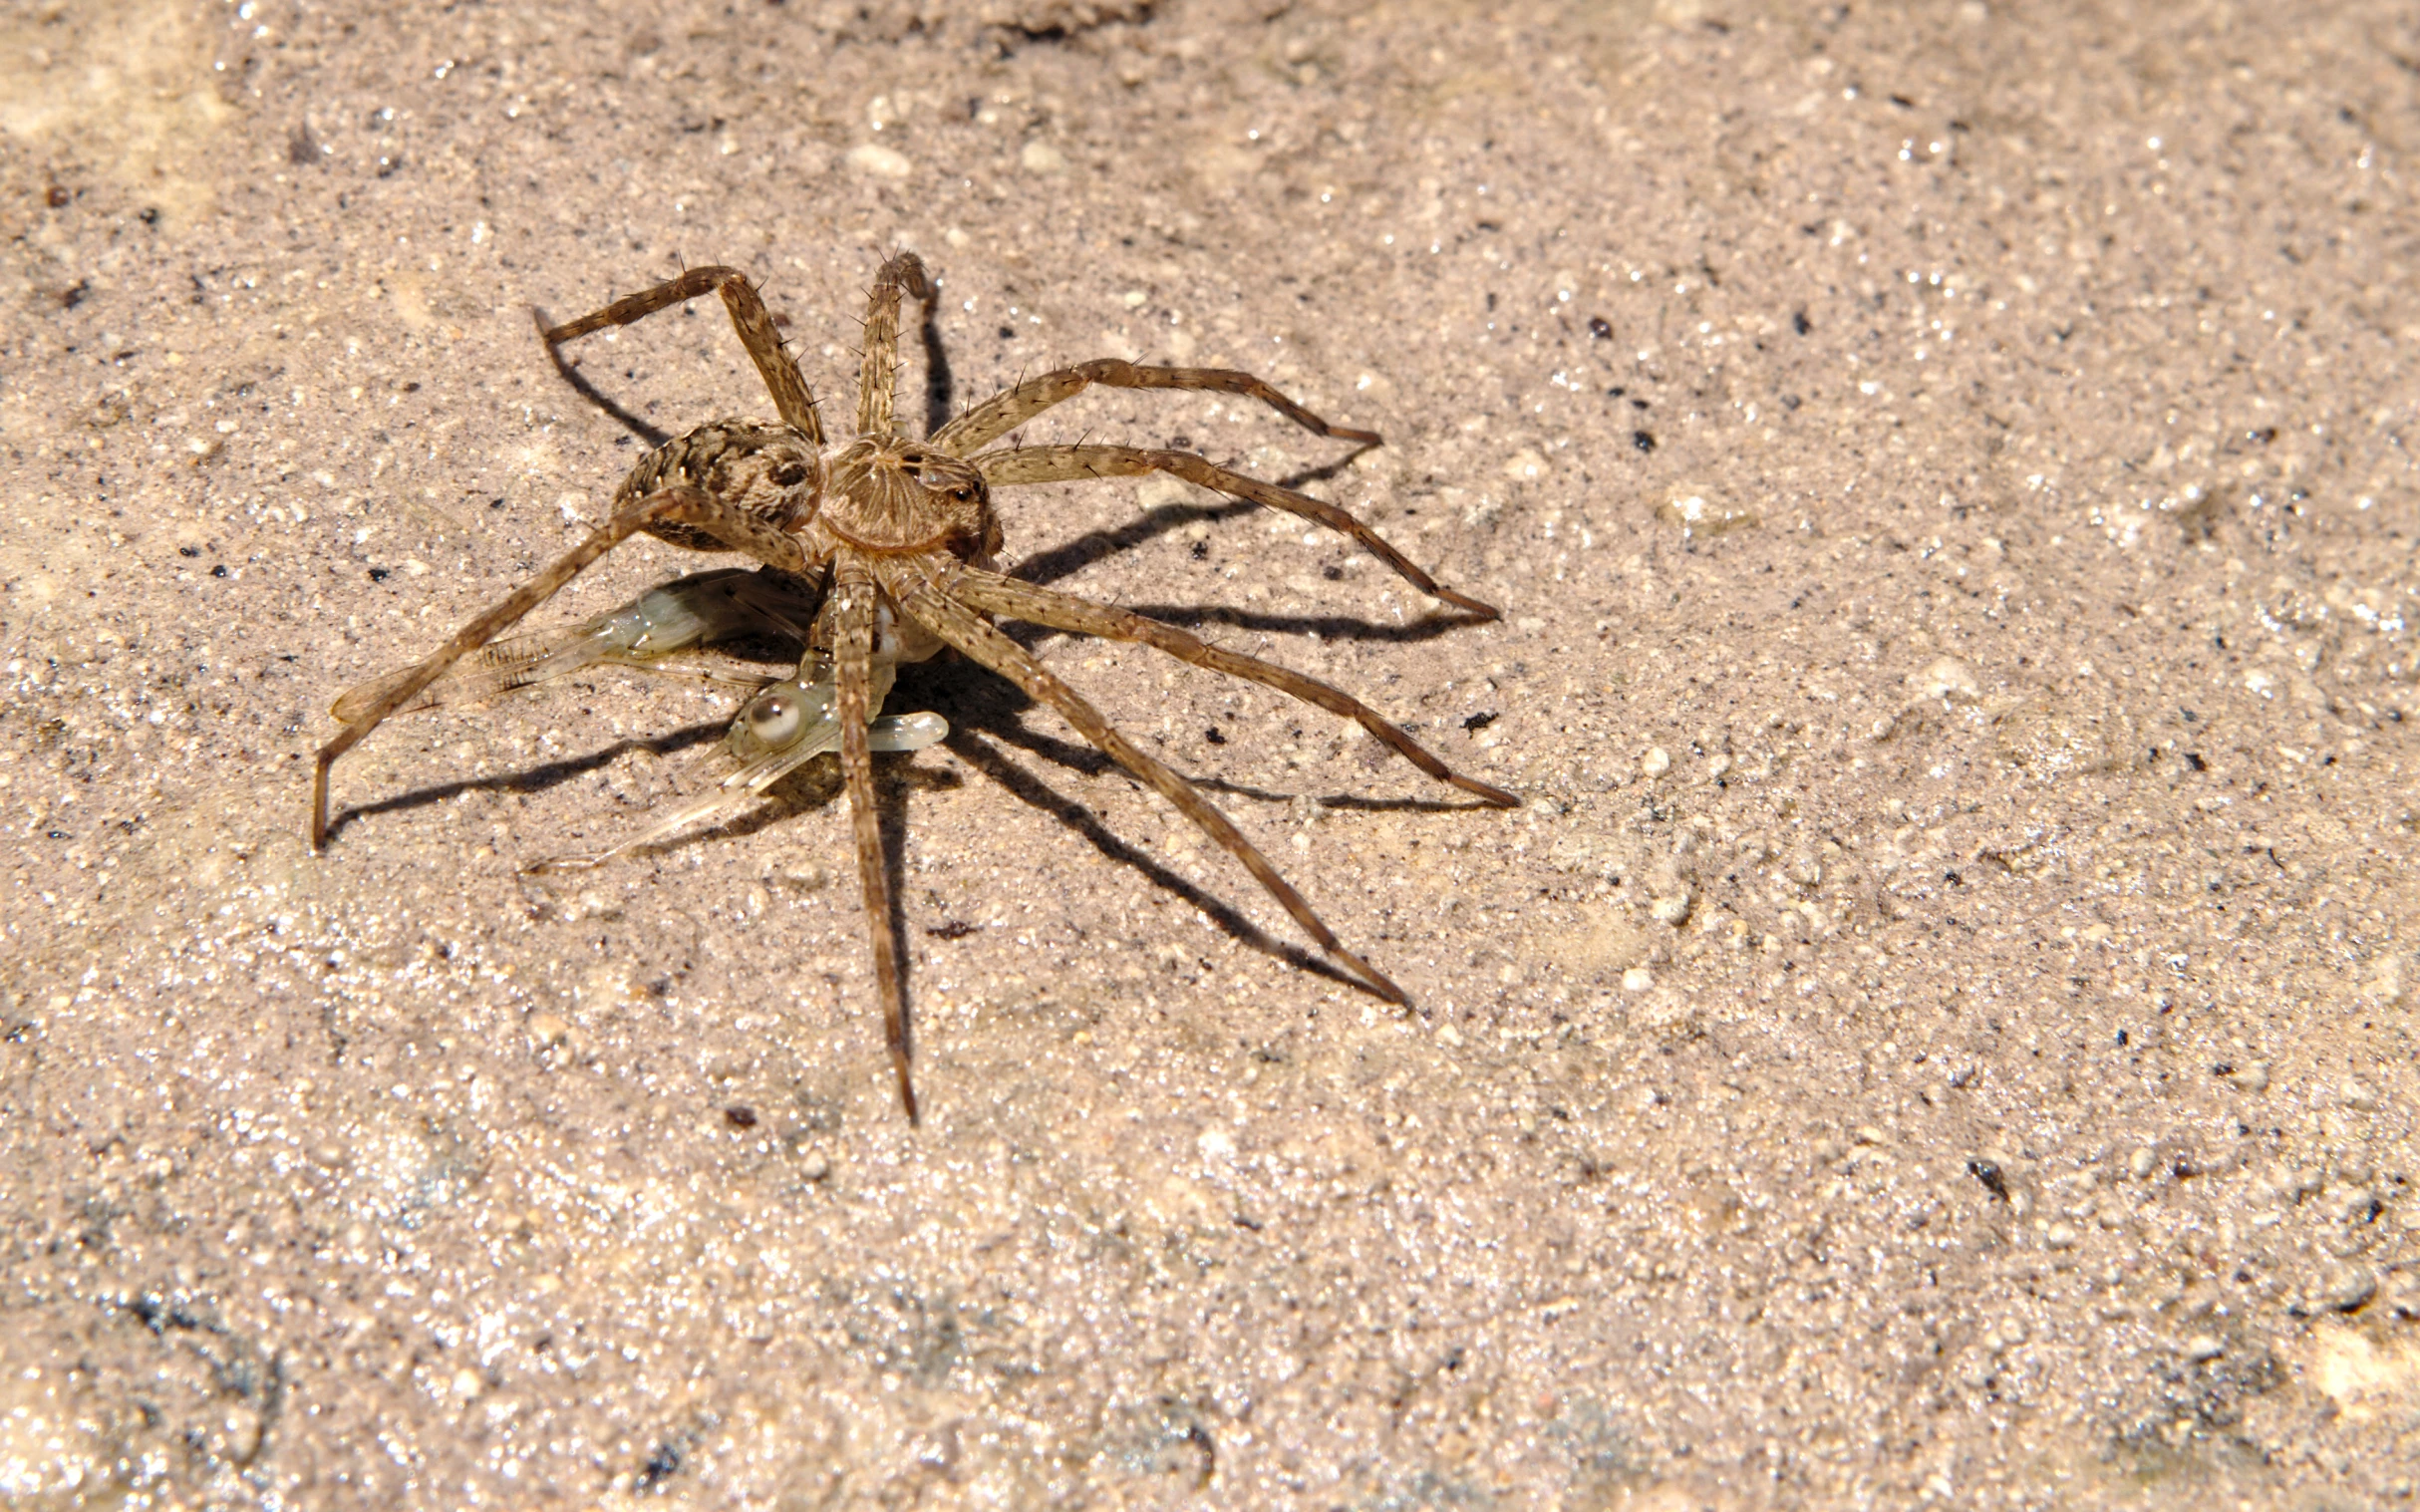 a large spider walking across a sandy ground